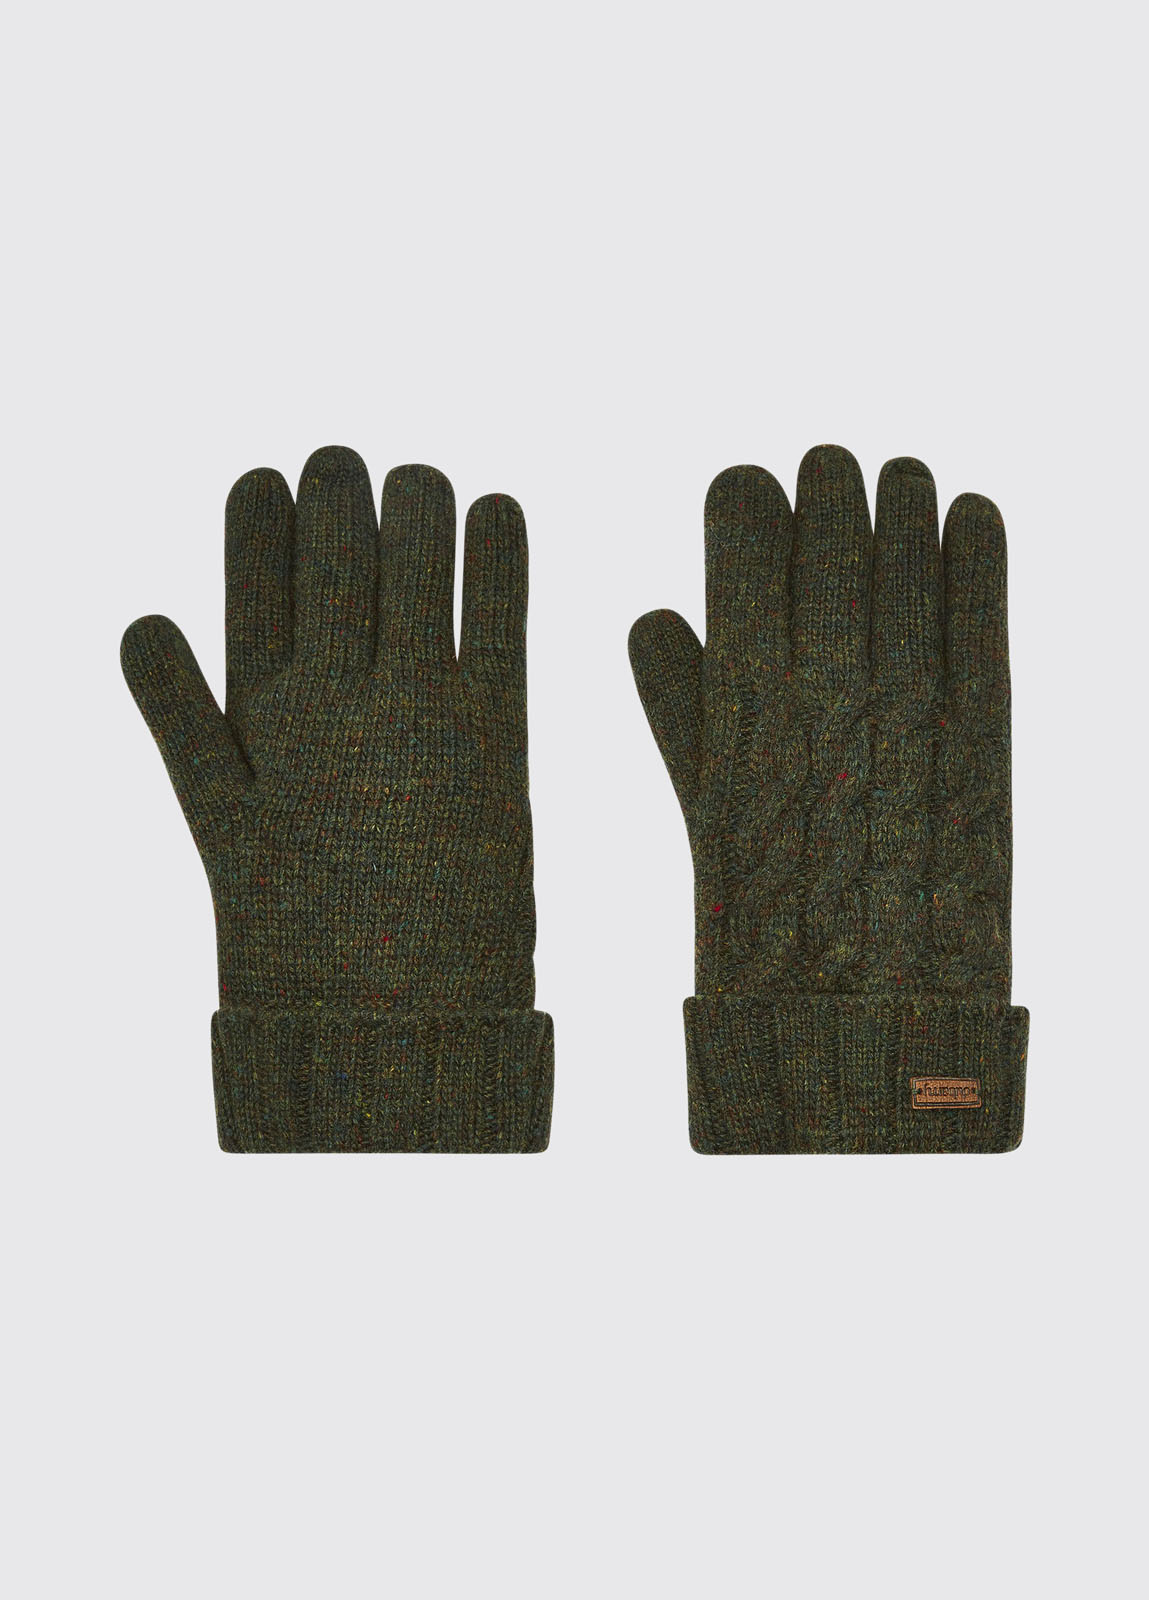 Buckley Knitted Gloves - Olive